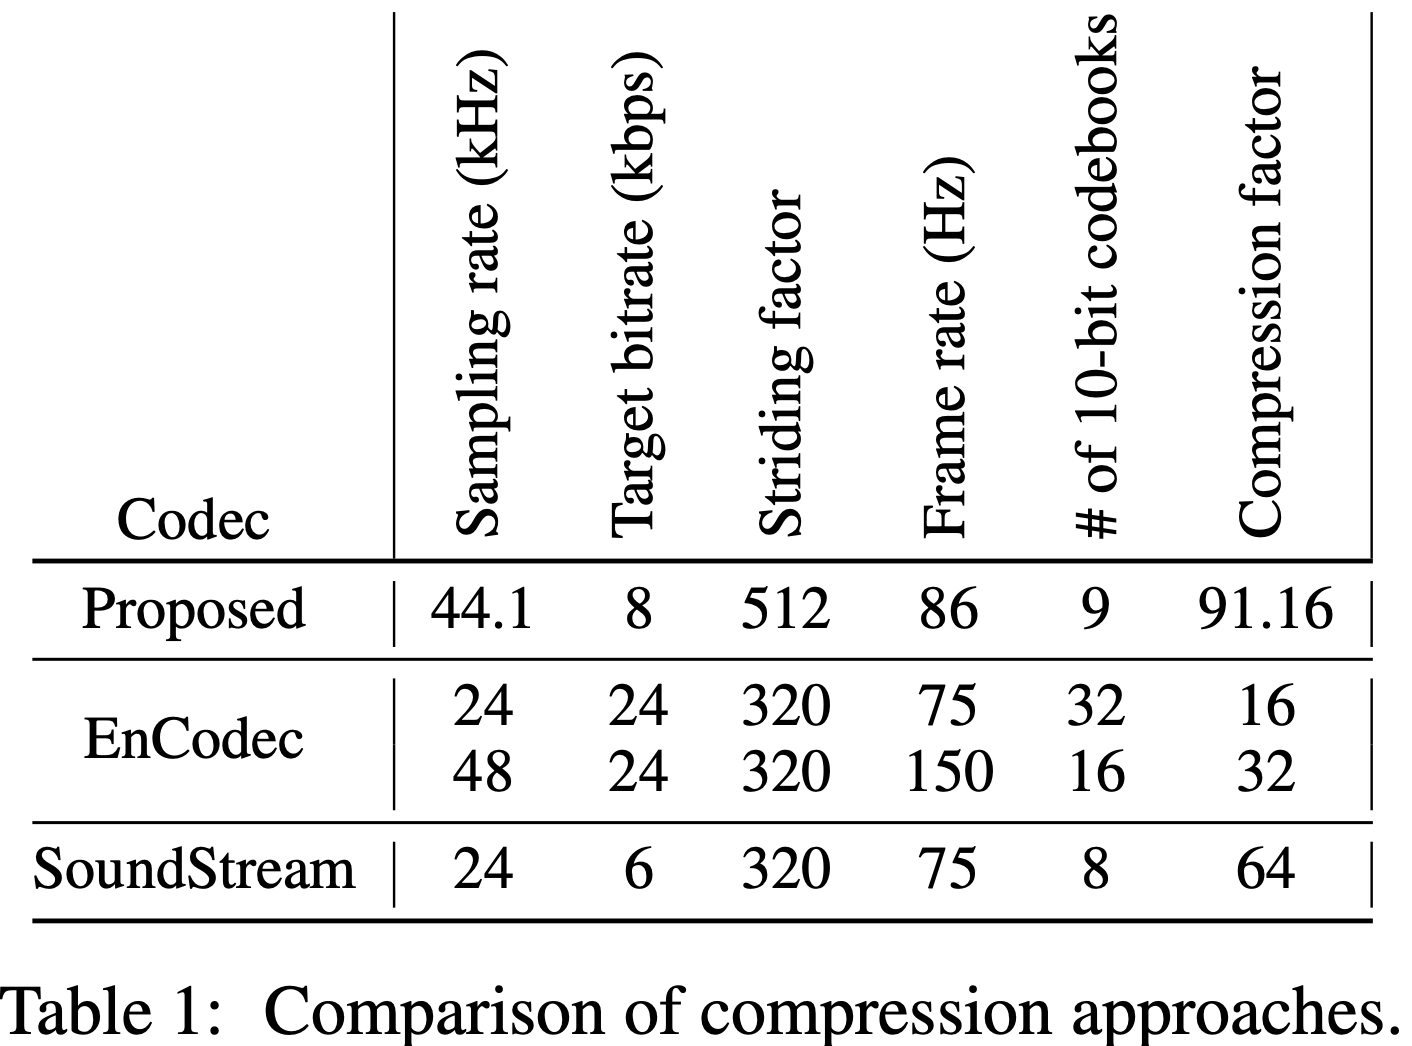 Comparison of compressions approaches. Our model achieves a higher compression factor compared to all baseline methods. Our model has a ~90x compression factor compared to 32x compression factor of EnCodec and 64x of SoundStream. Note that we operate at a target bitrate of 8 kbps, whereas EnCodec operates at 24 kbps and SoundStream at 6 kbps. We also operate at 44.1 kHz, whereas EnCodec operates at 48 kHz and SoundStream operates at 24 kHz.